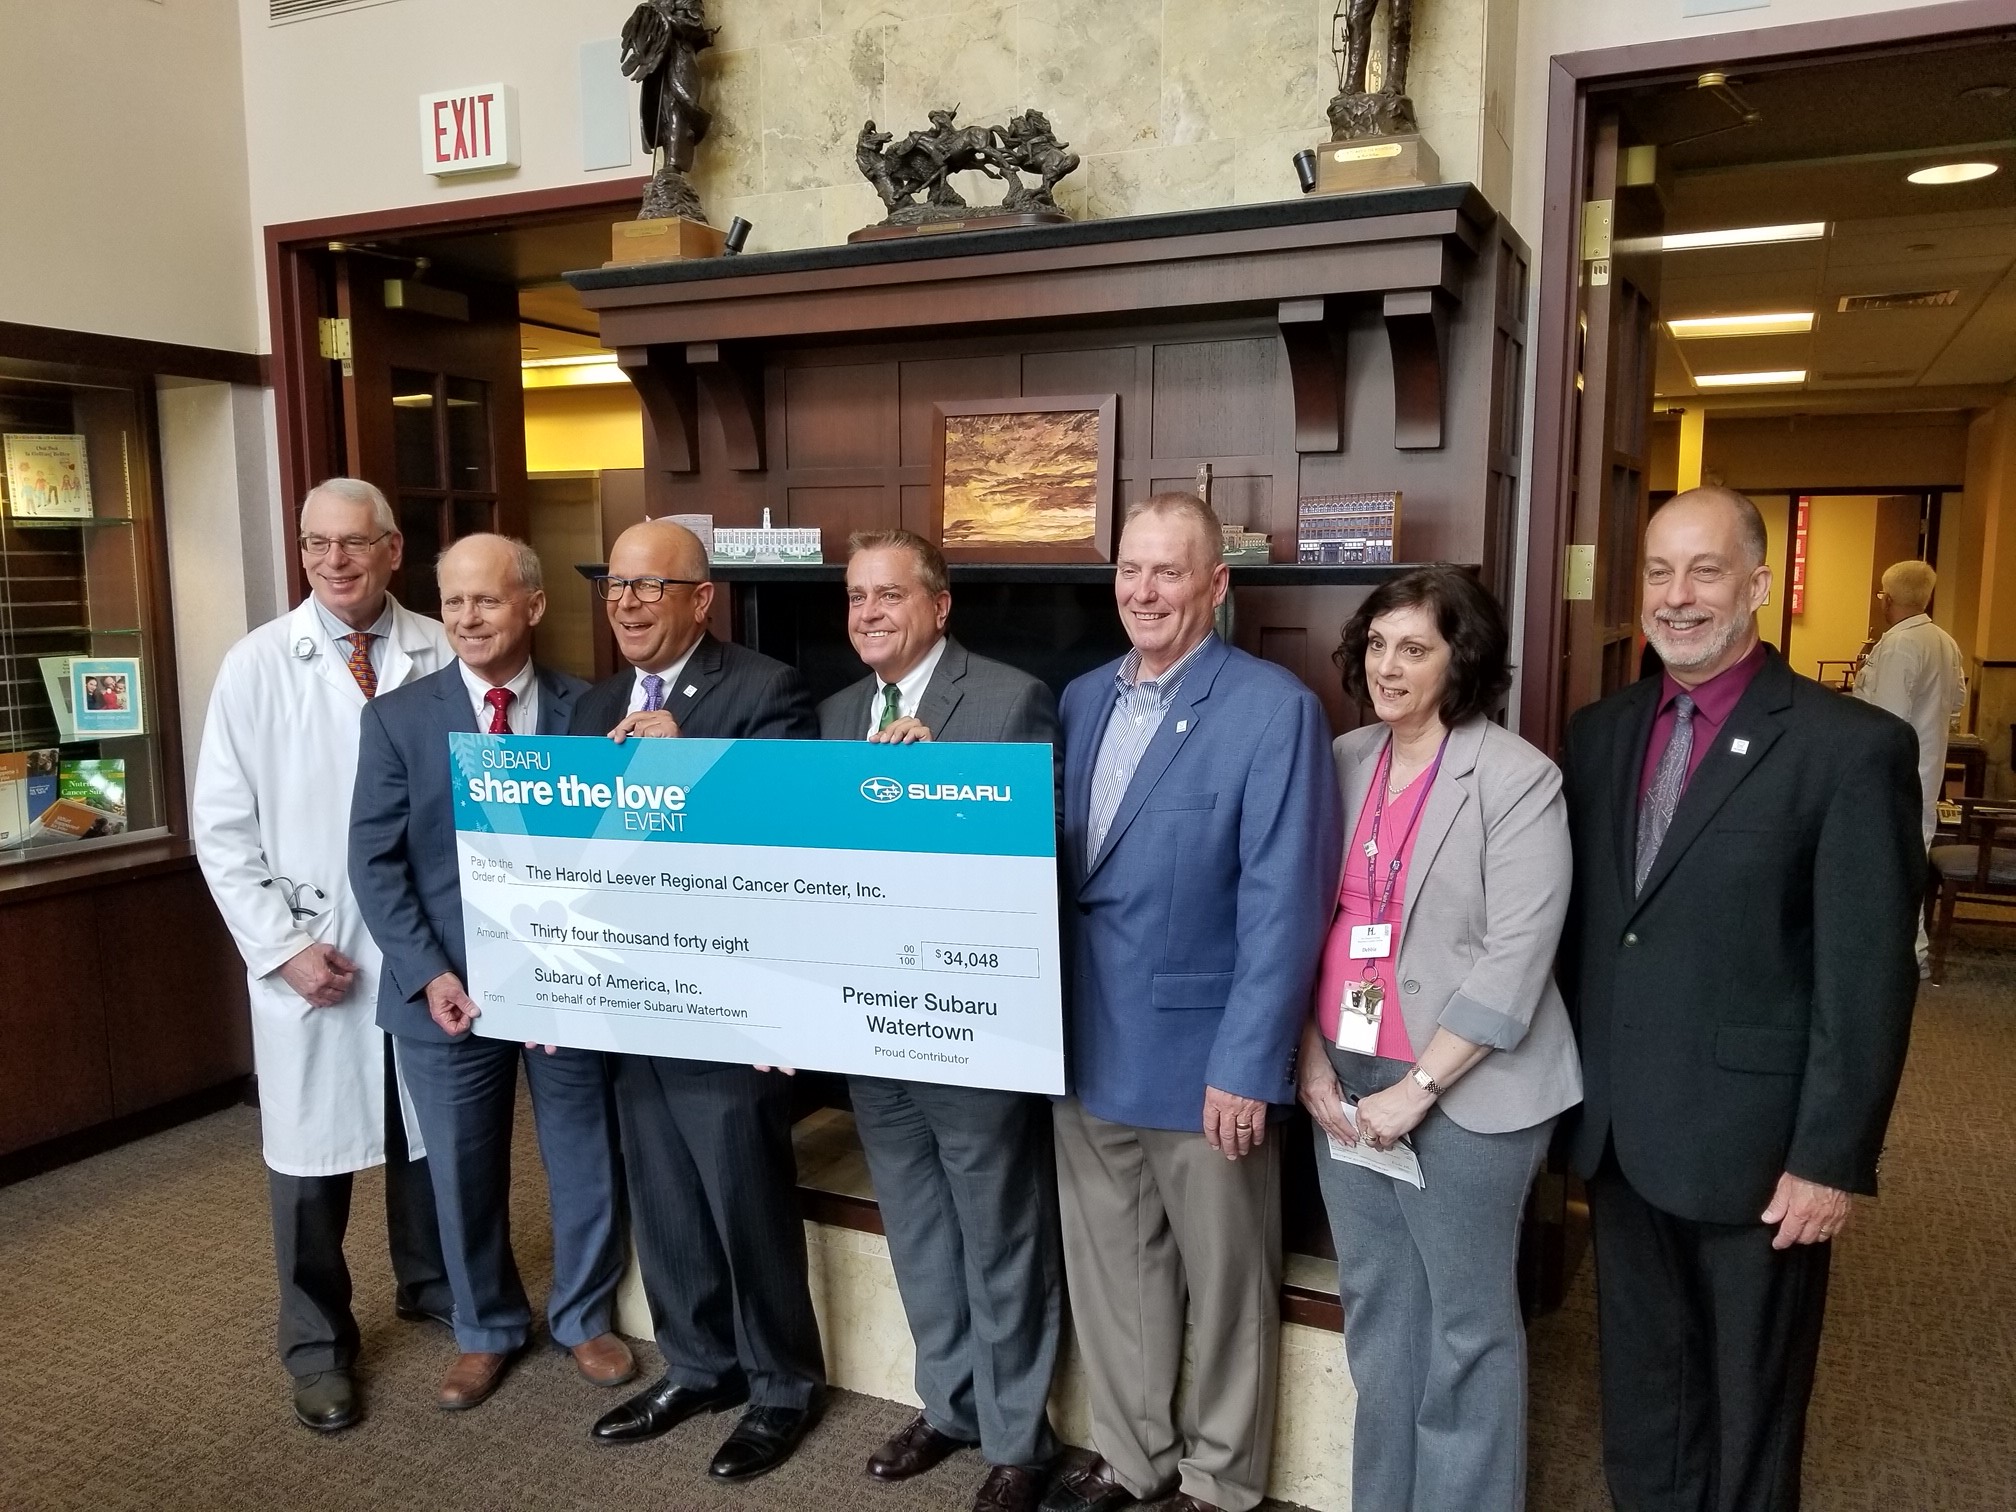 Robert J. Alvine presents the team from the Harold Leever Regional Cancer Center a Check